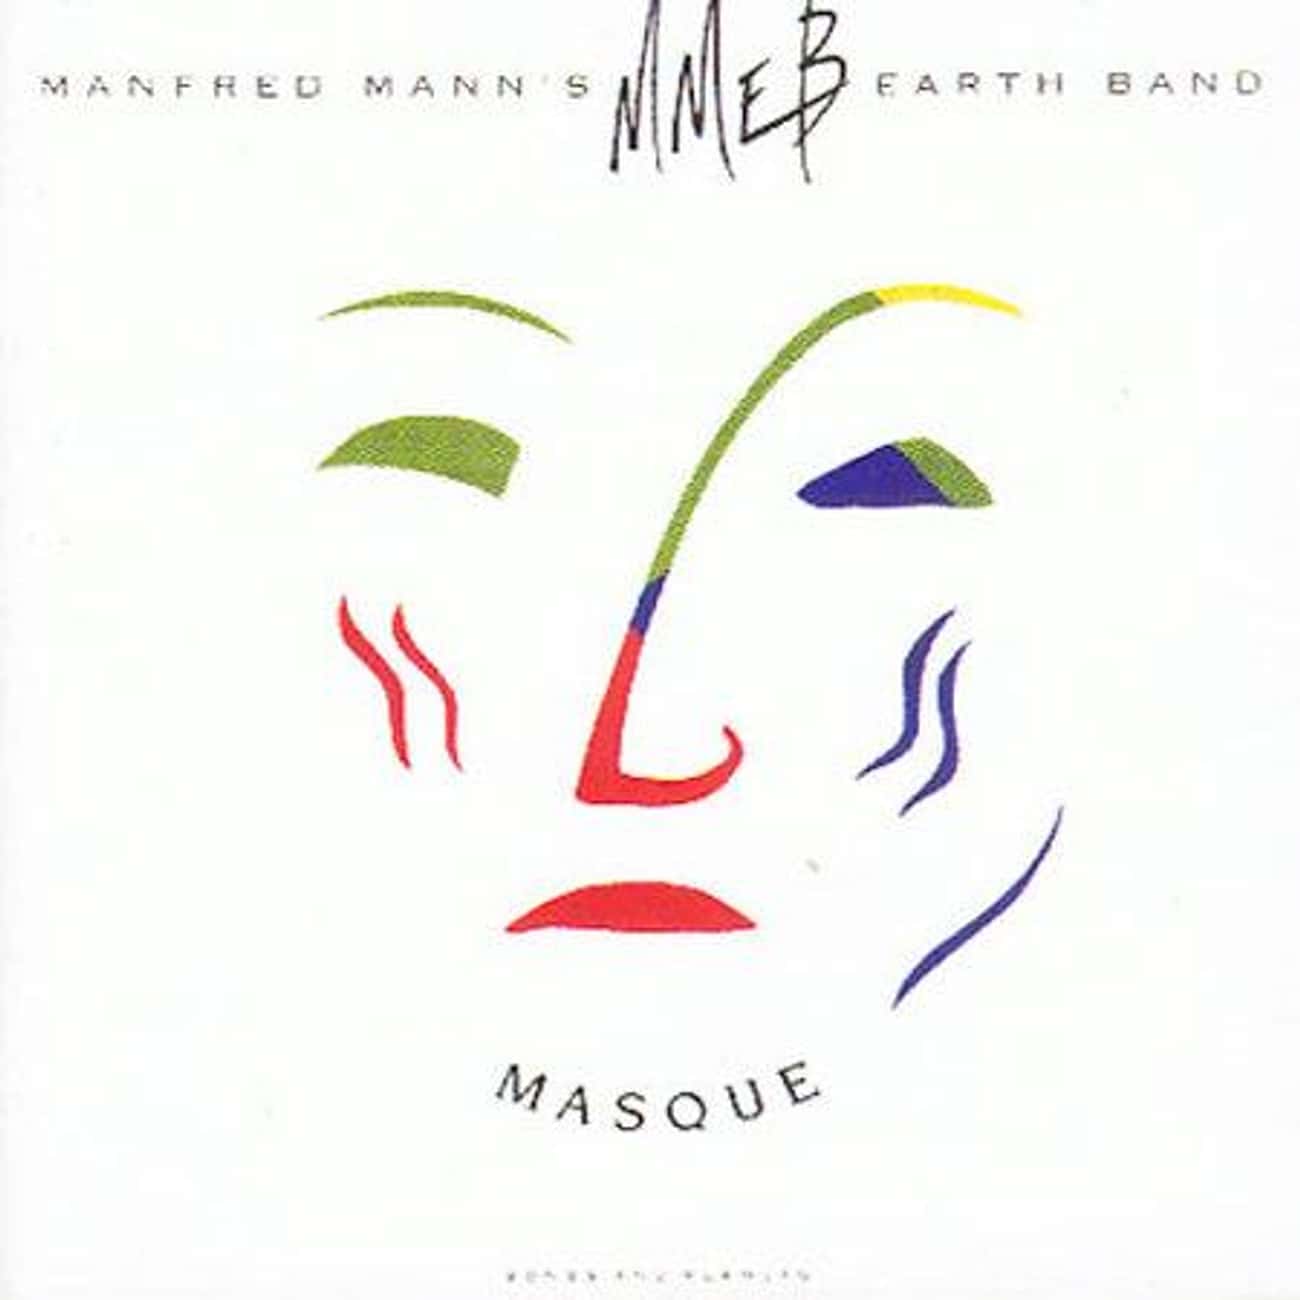 Masque: Songs and Planets